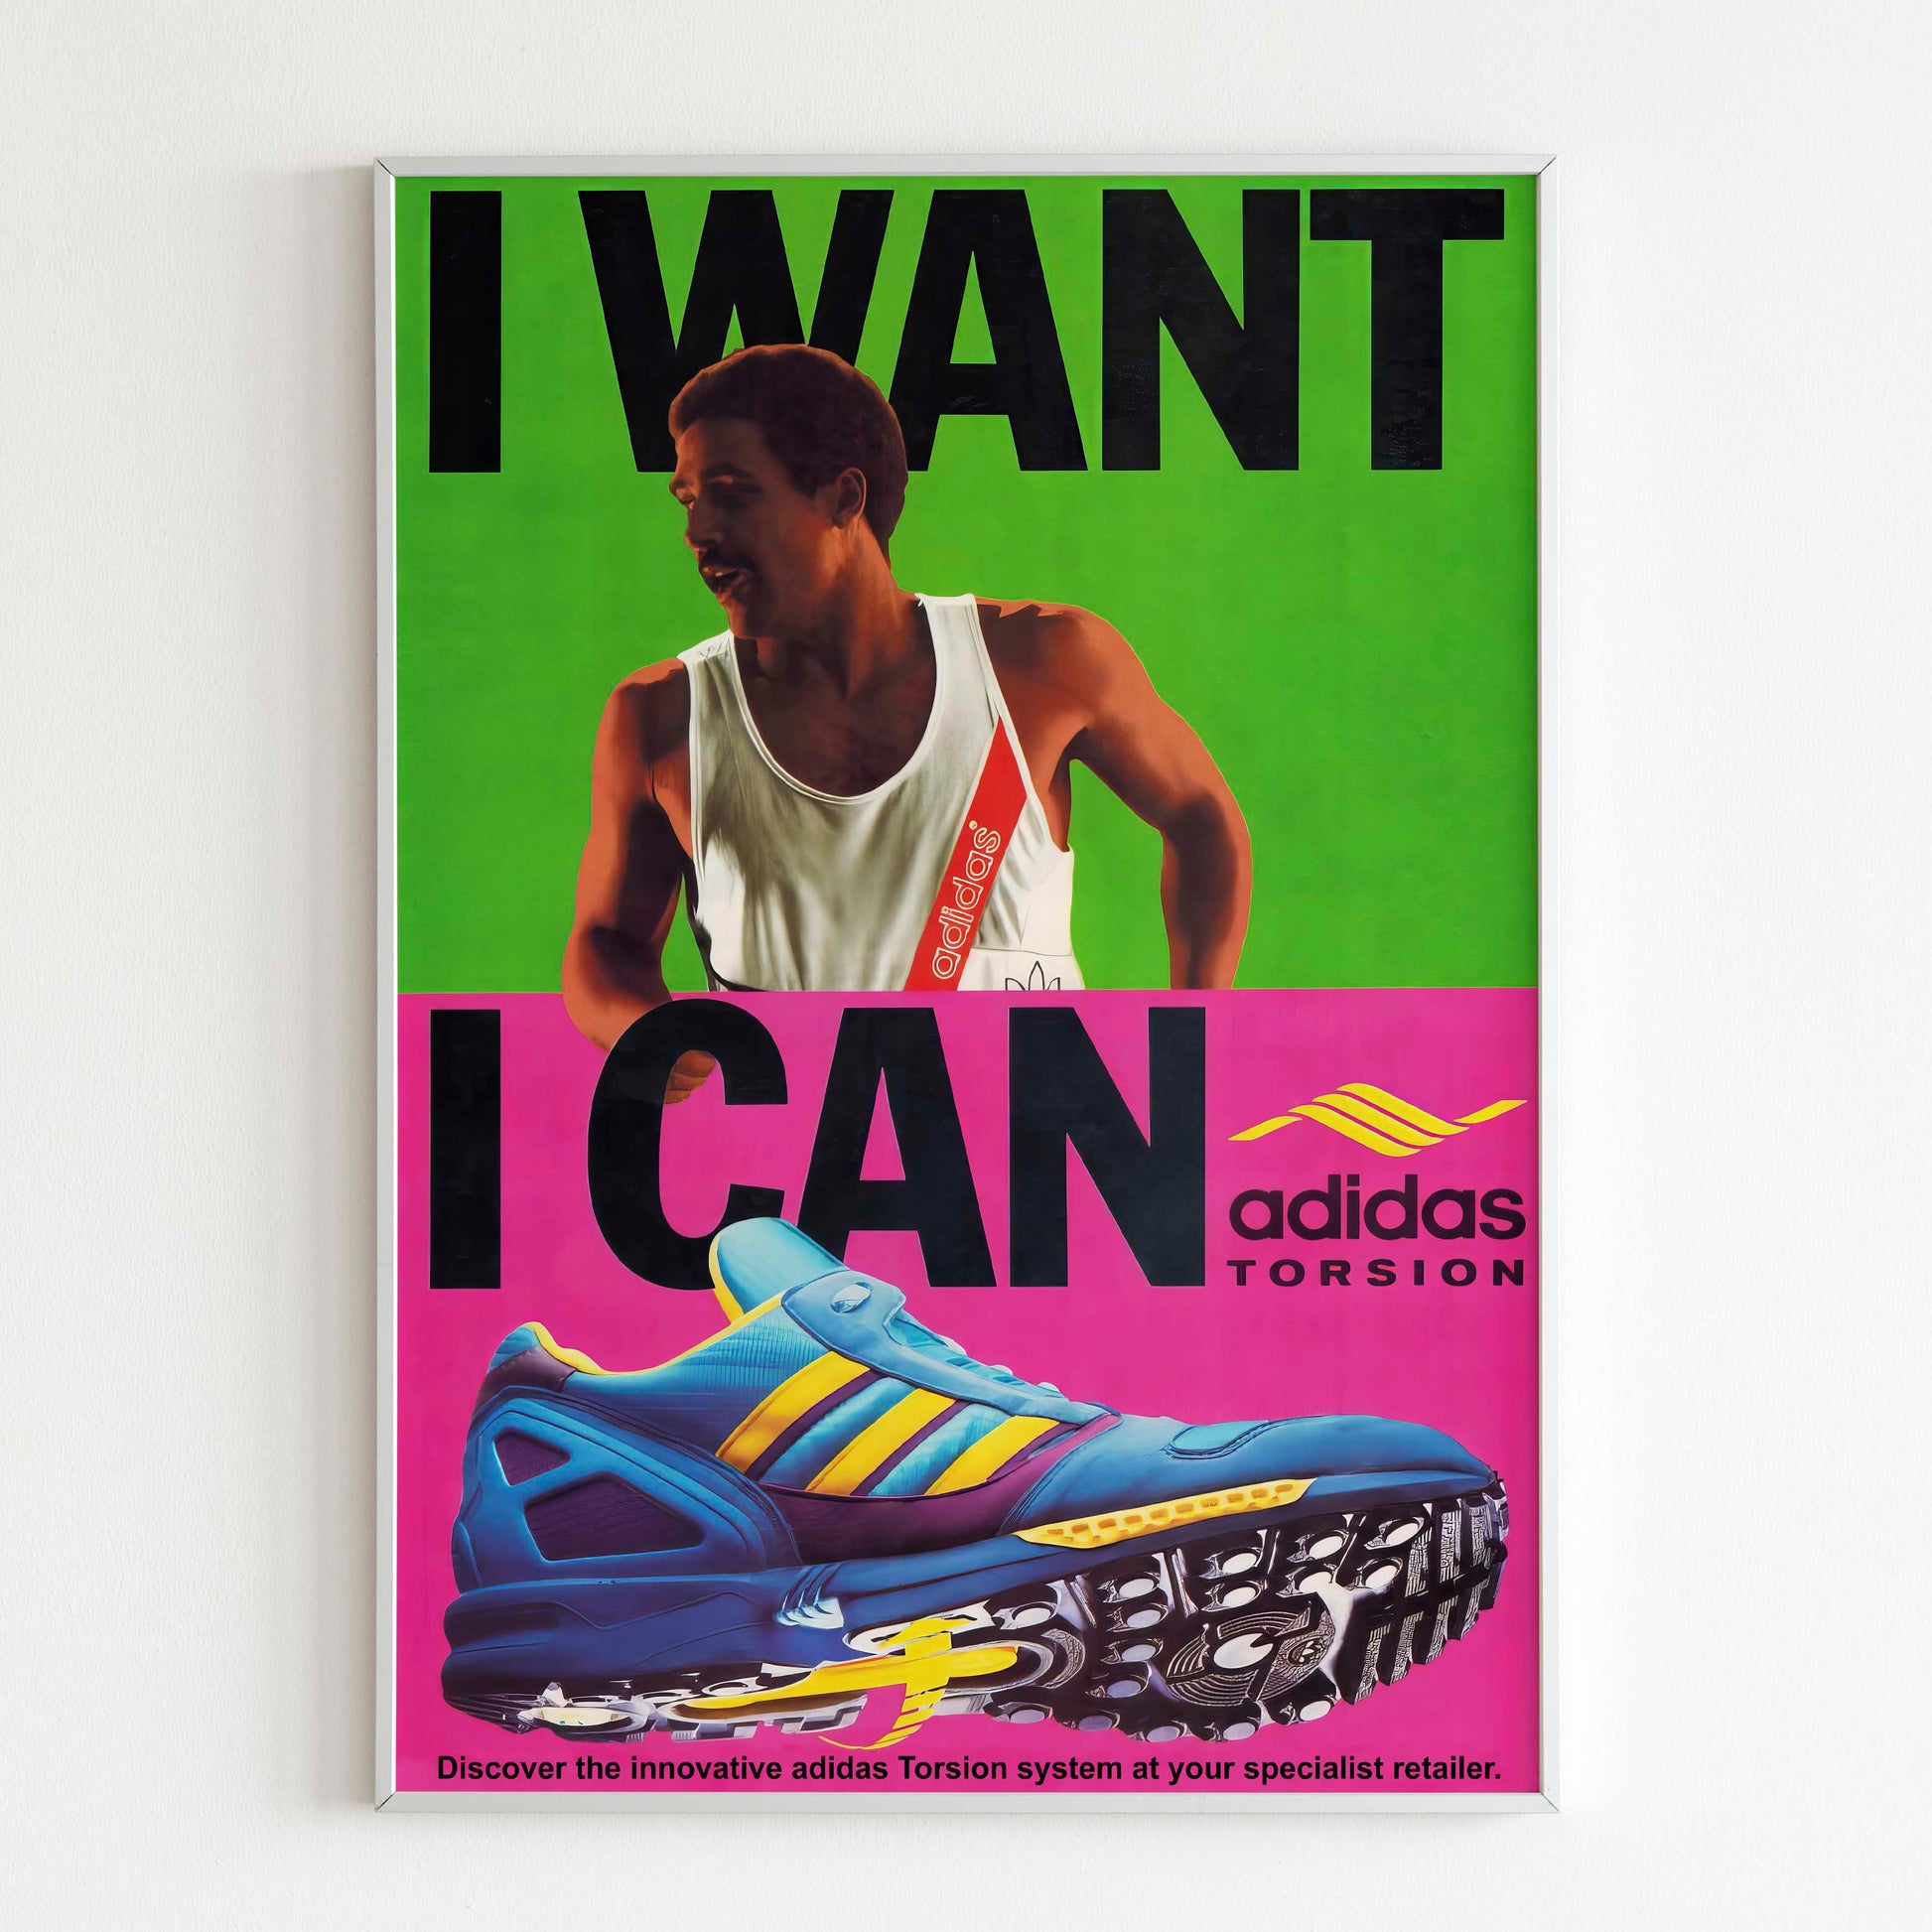 Adidas ZX8 Torsion "I Want I Can" 1989 Advertising Poster, 80s Style Shoes Print, Vintage Running Ad Wall Art, Magazine Retro Advertisement